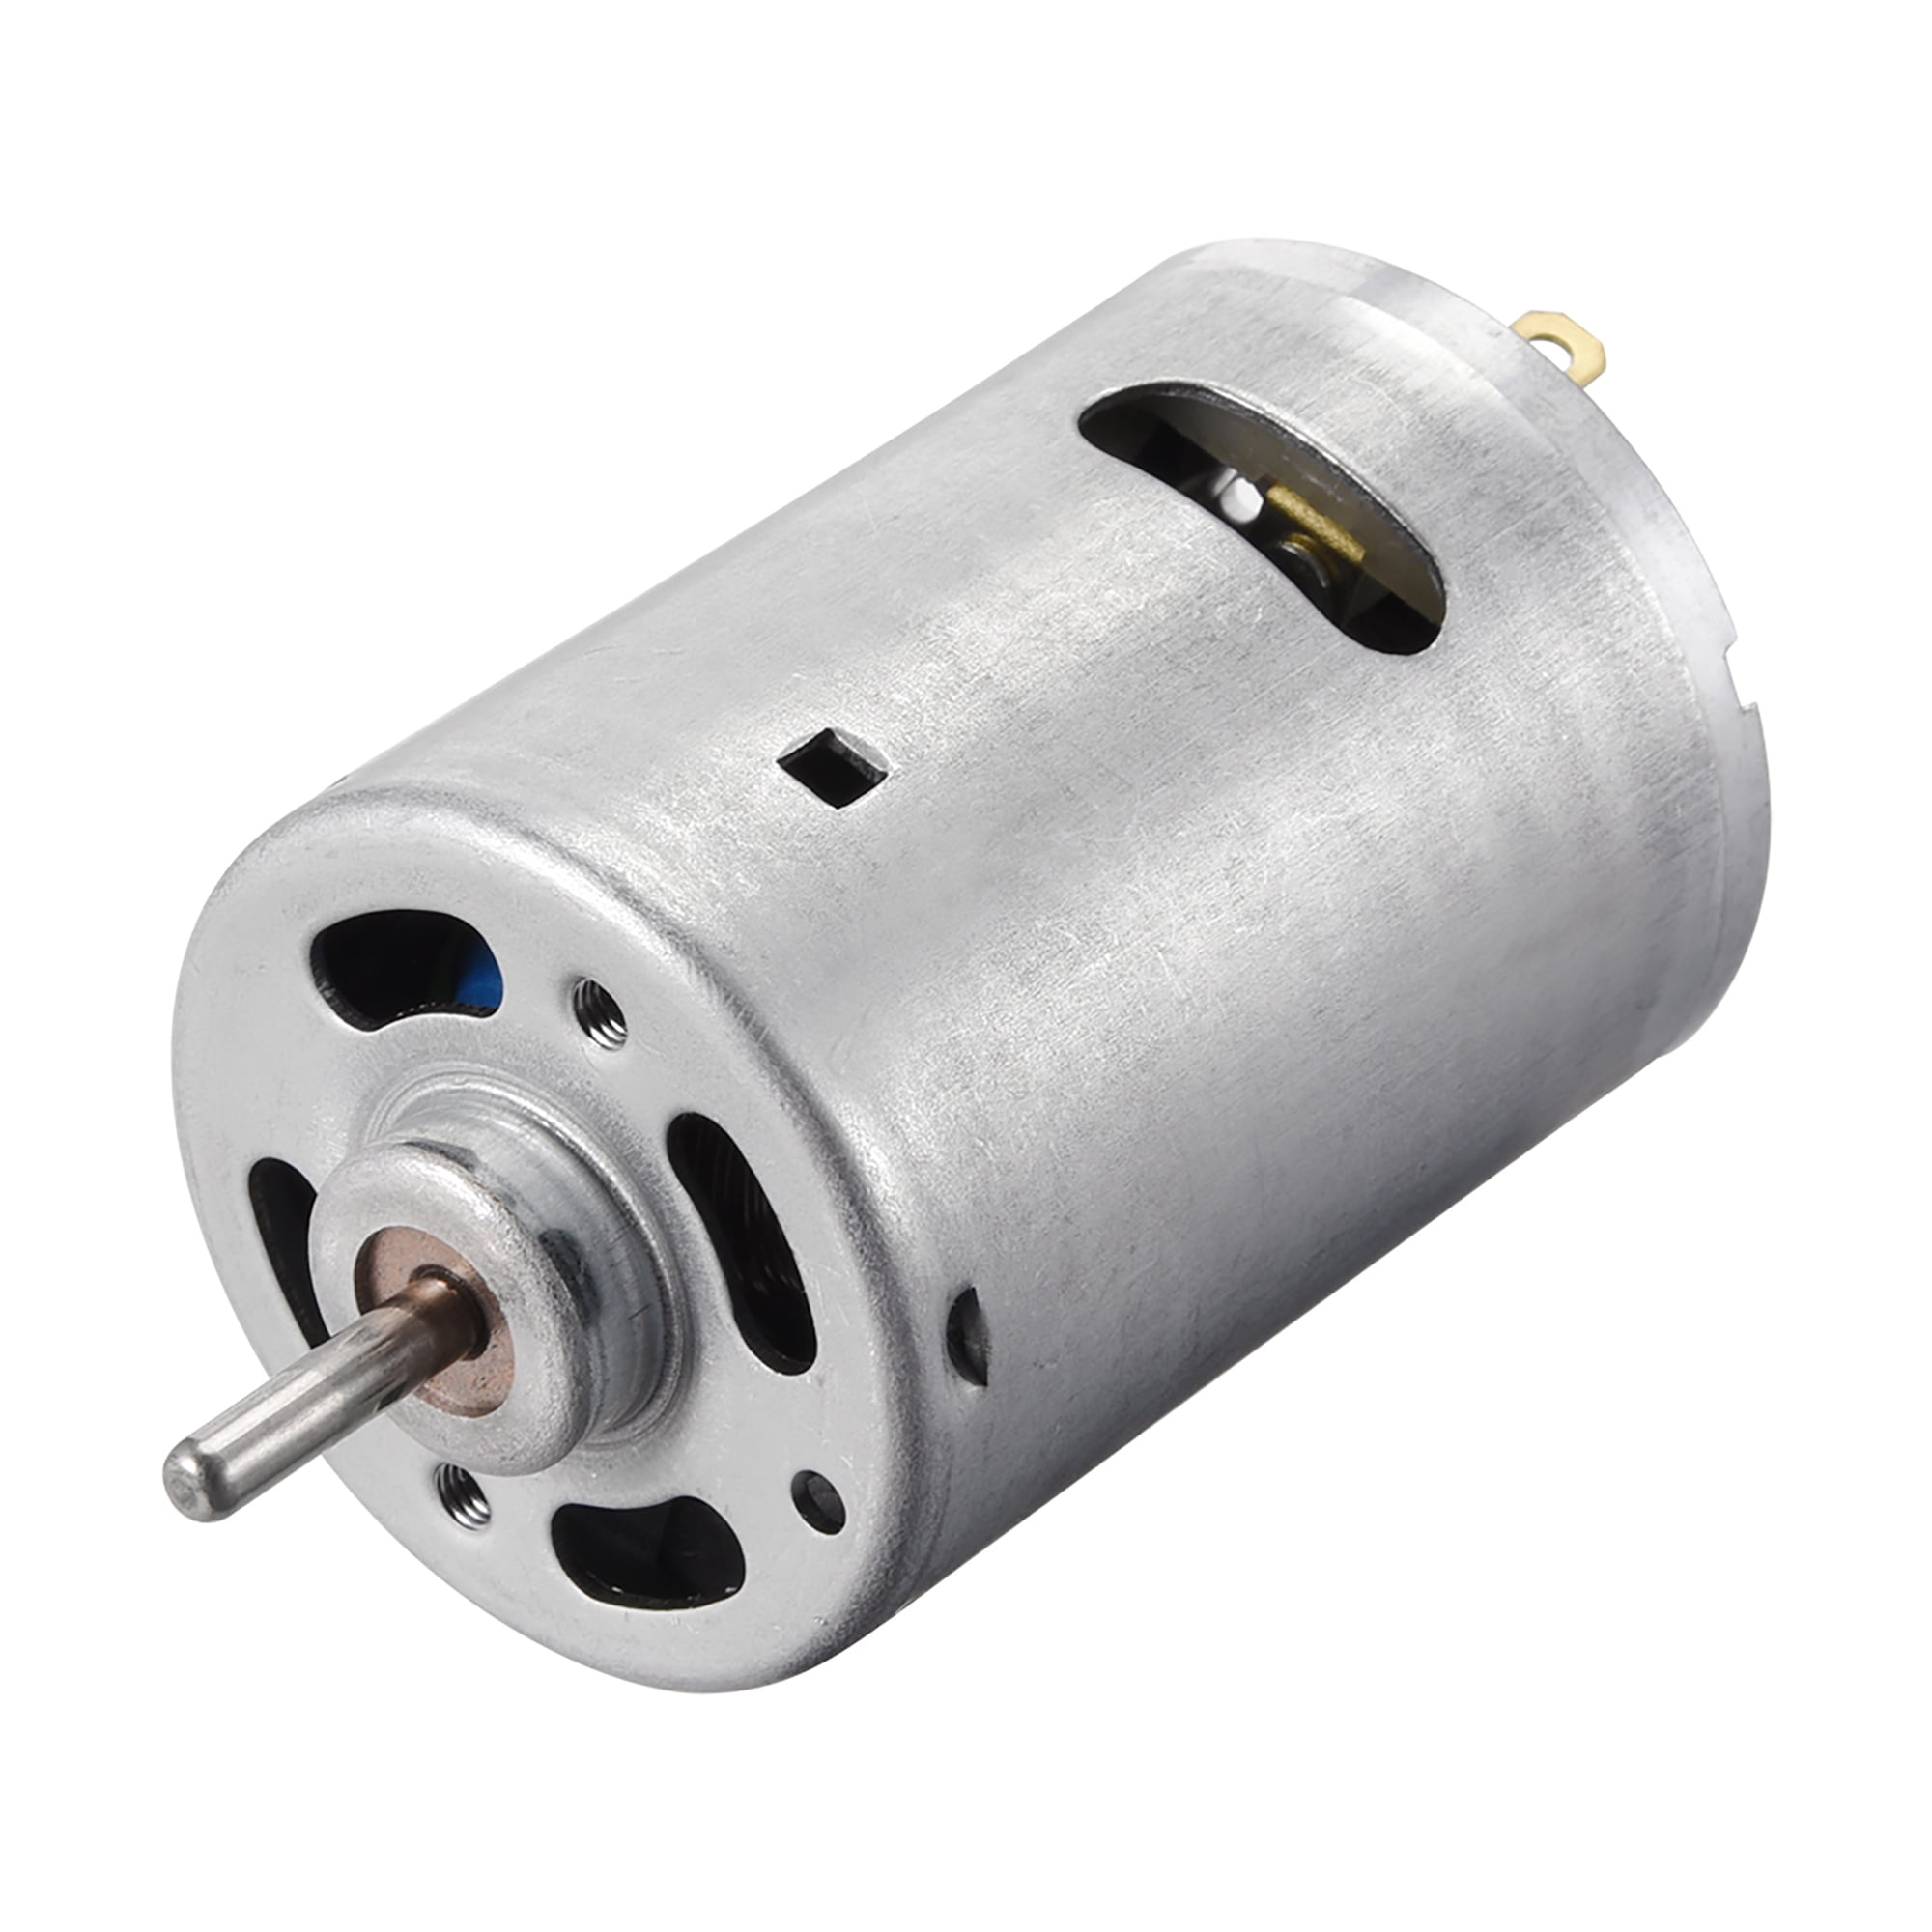 DC Motor 12V 10000RPM 0.4A Electric Motor Round Shaft, for RC Boat